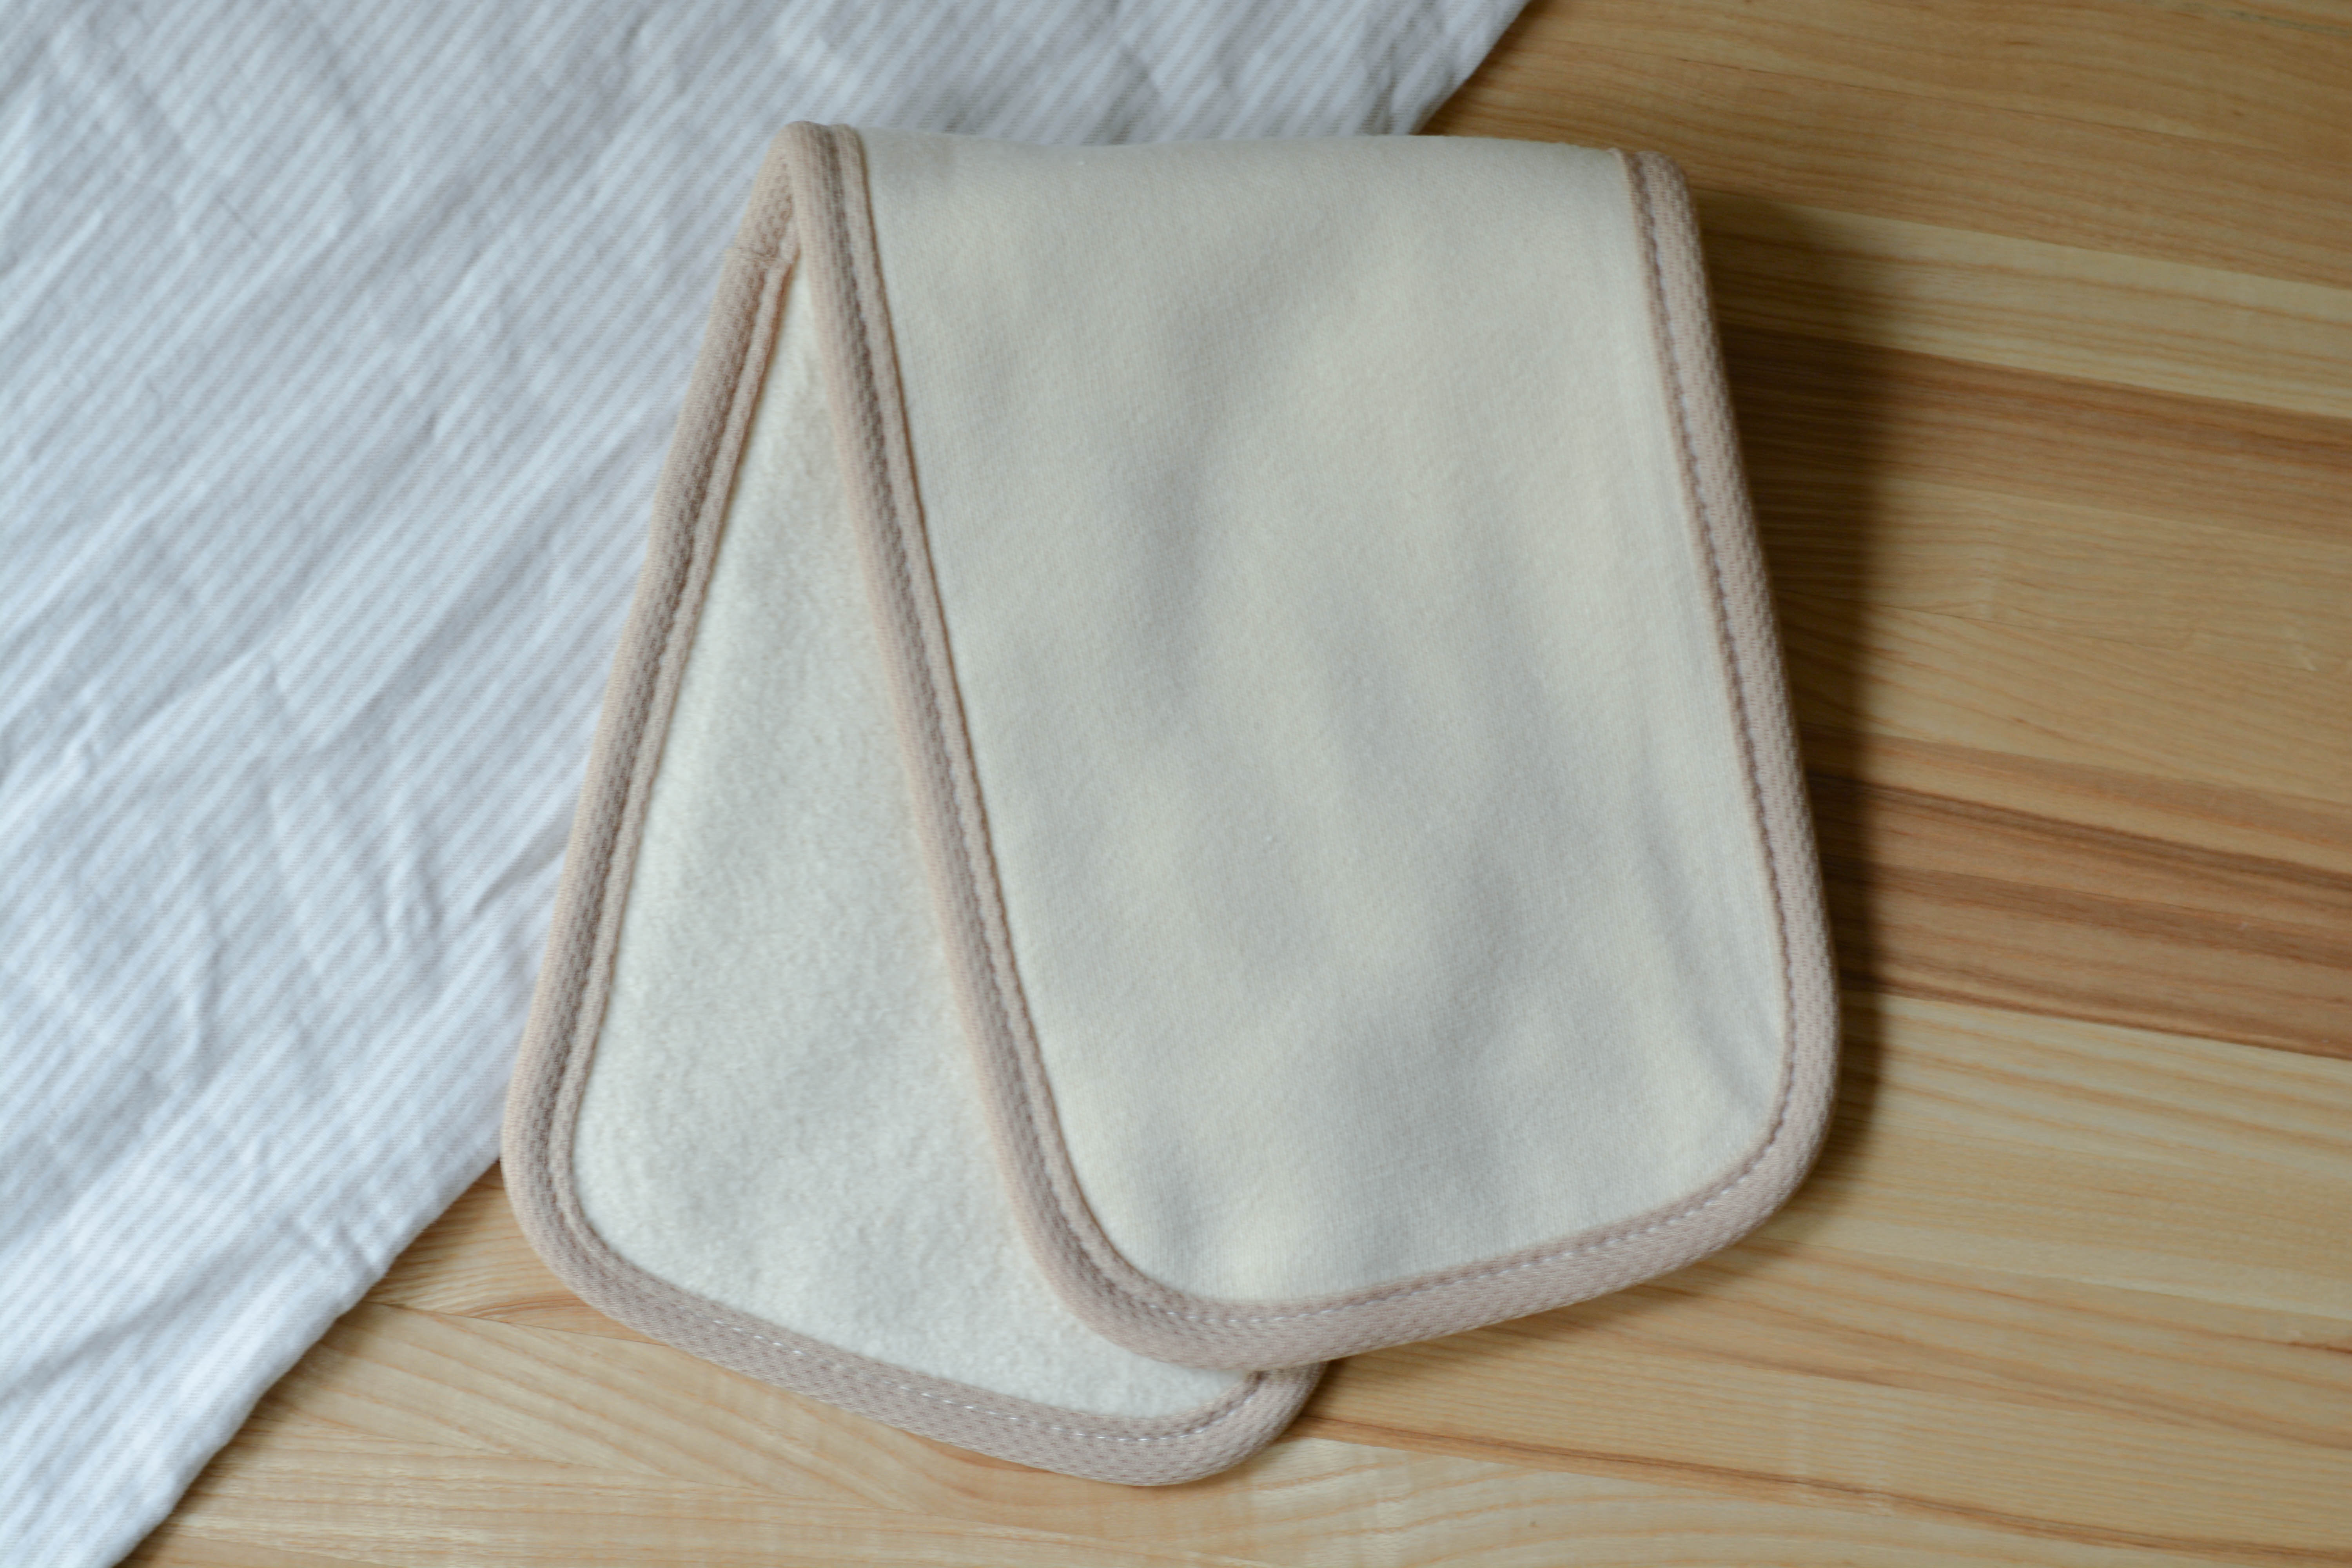 4 Layer AWJ Edged Insert: Reusable Cloth Diaper Liner